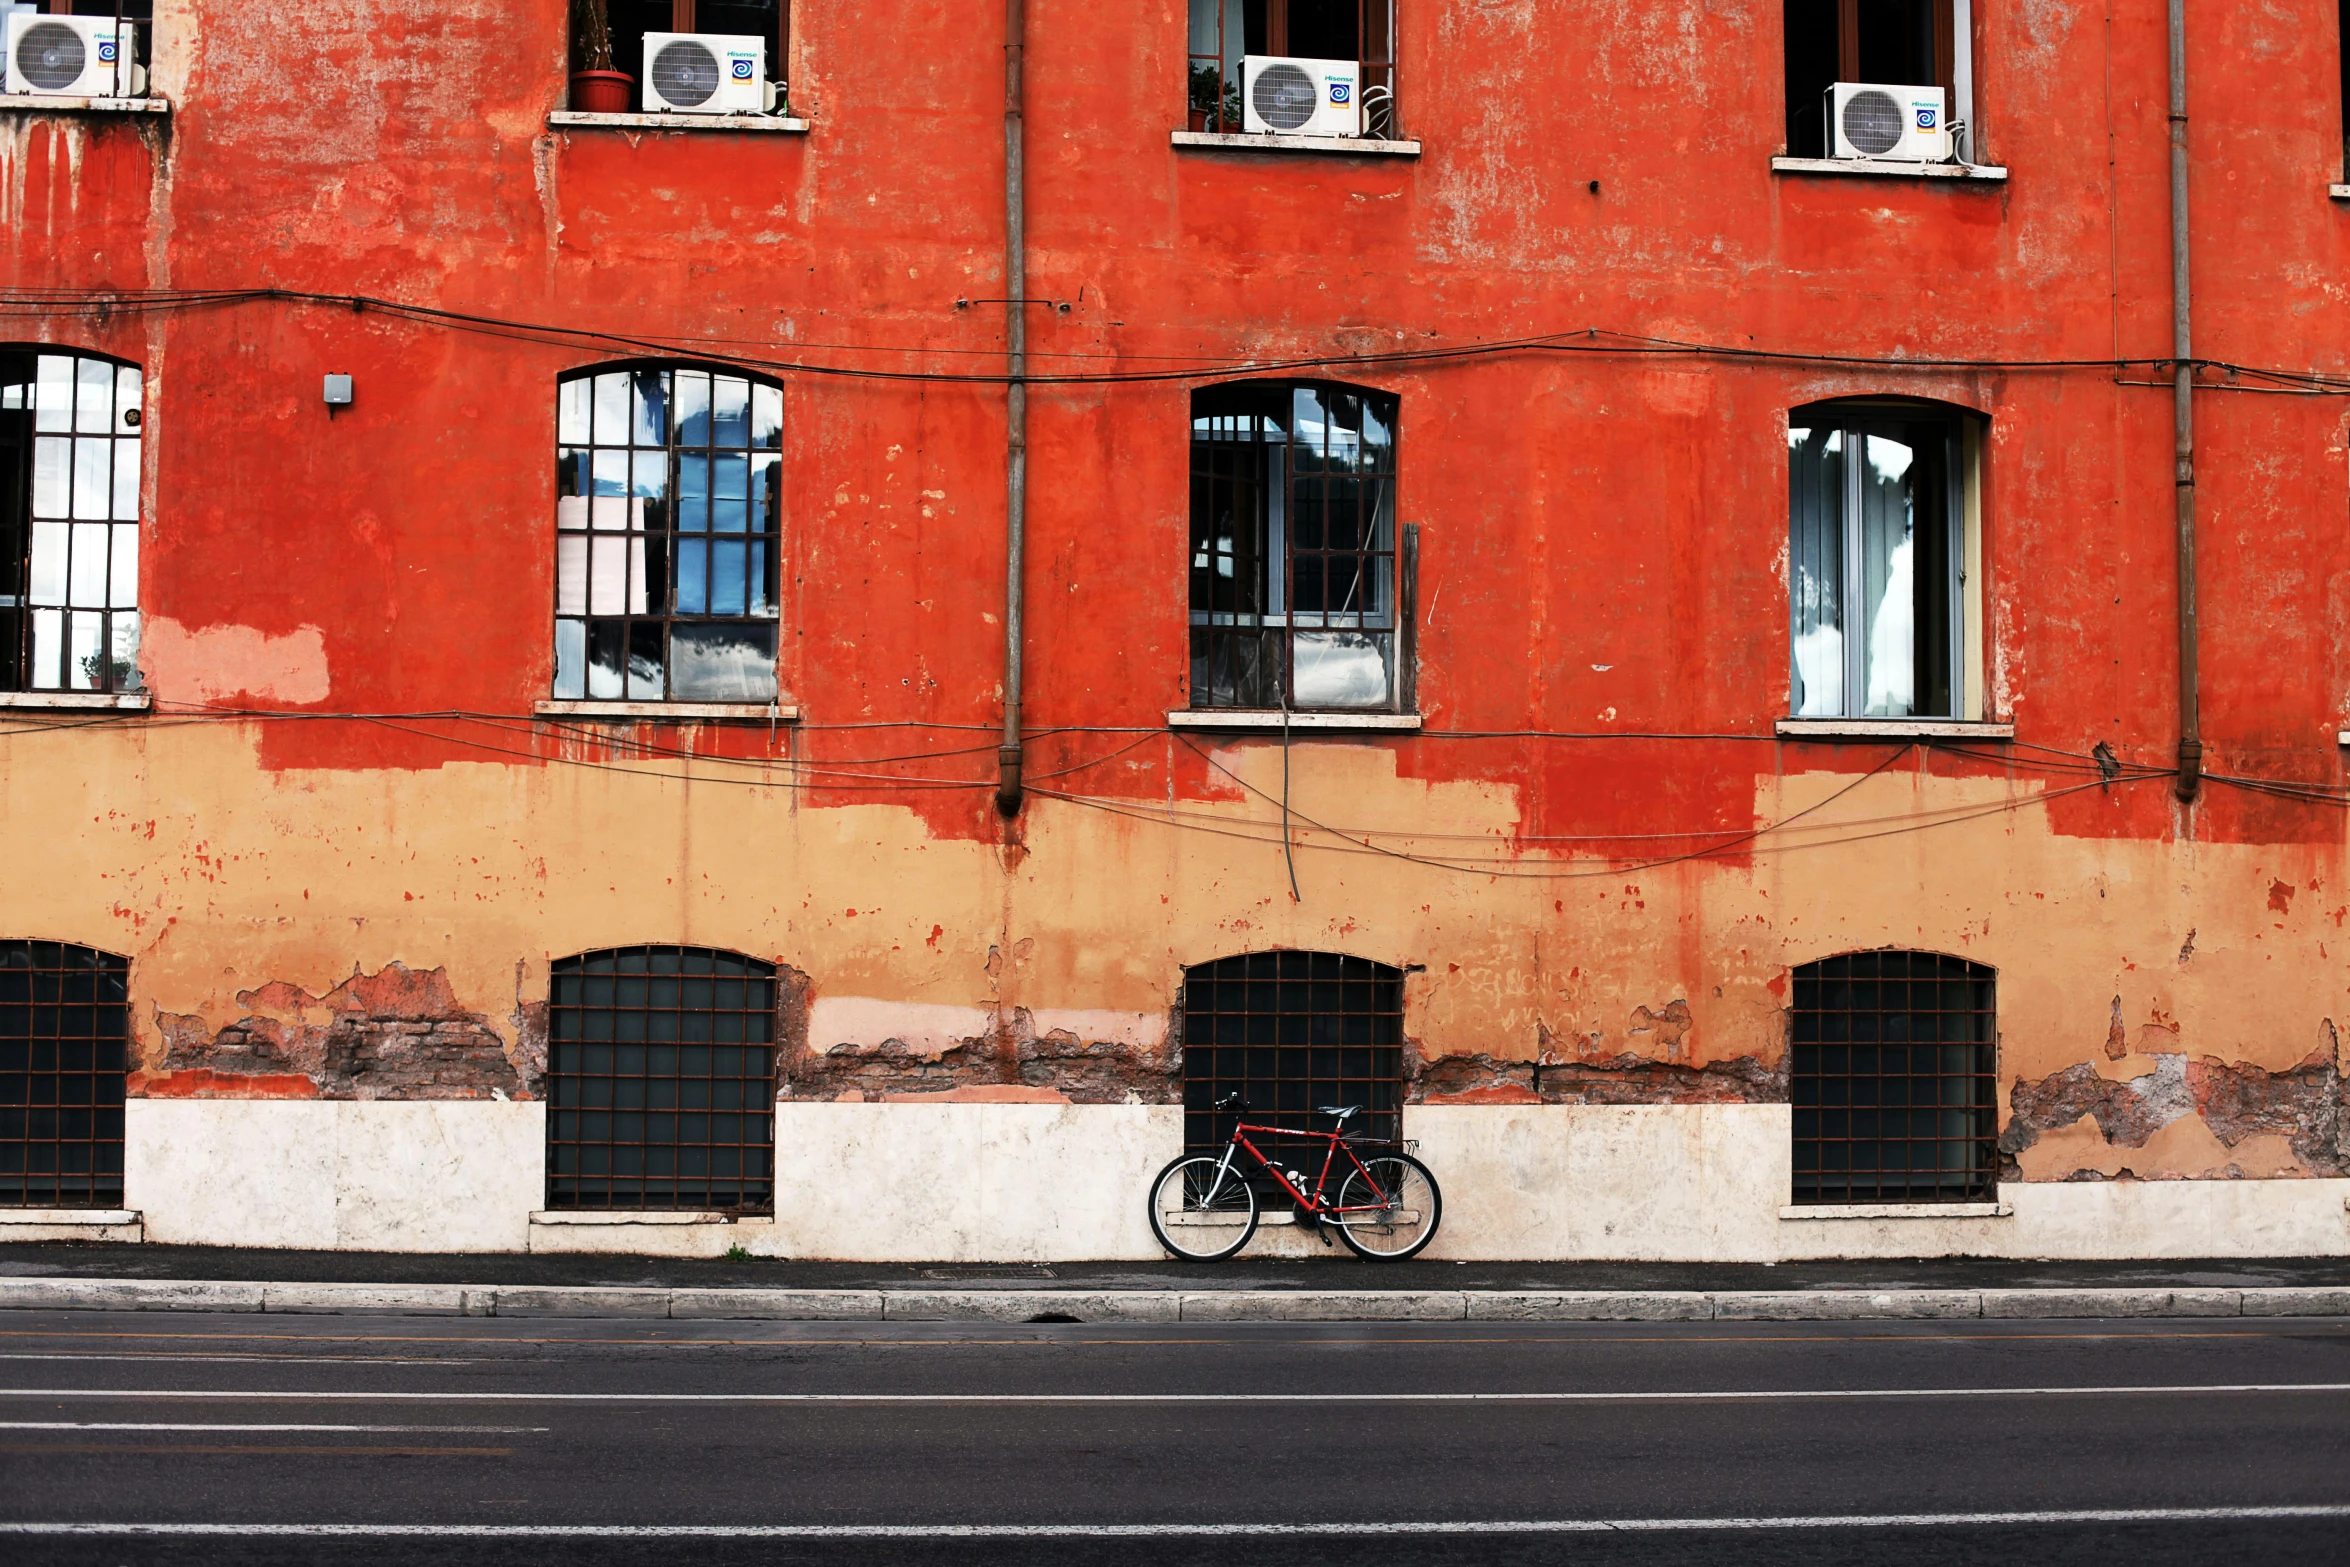 a bike is parked in front of a building, inspired by Steve McCurry, pexels contest winner, postminimalism, burnt sienna and venetian red, view from across the street, freddy mamani silvestre facade, a small